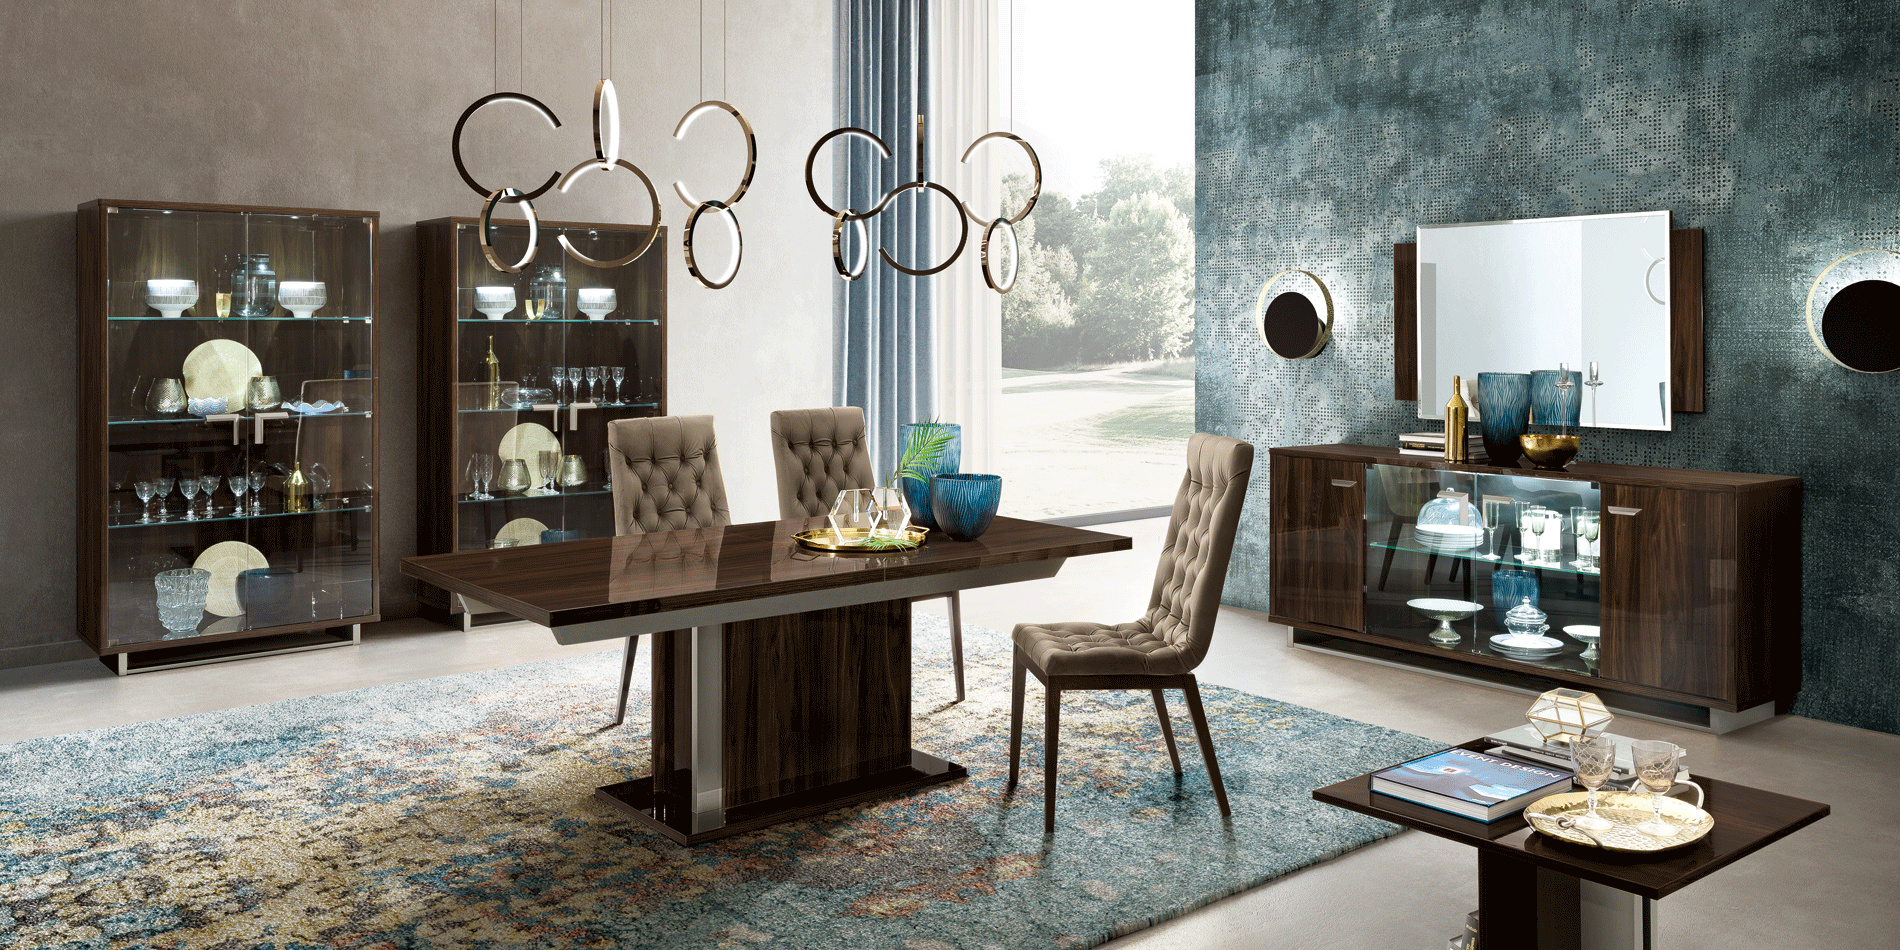 Brands Camel Gold Collection, Italy Volare Dining room Dark Walnut/Nickel Additional items